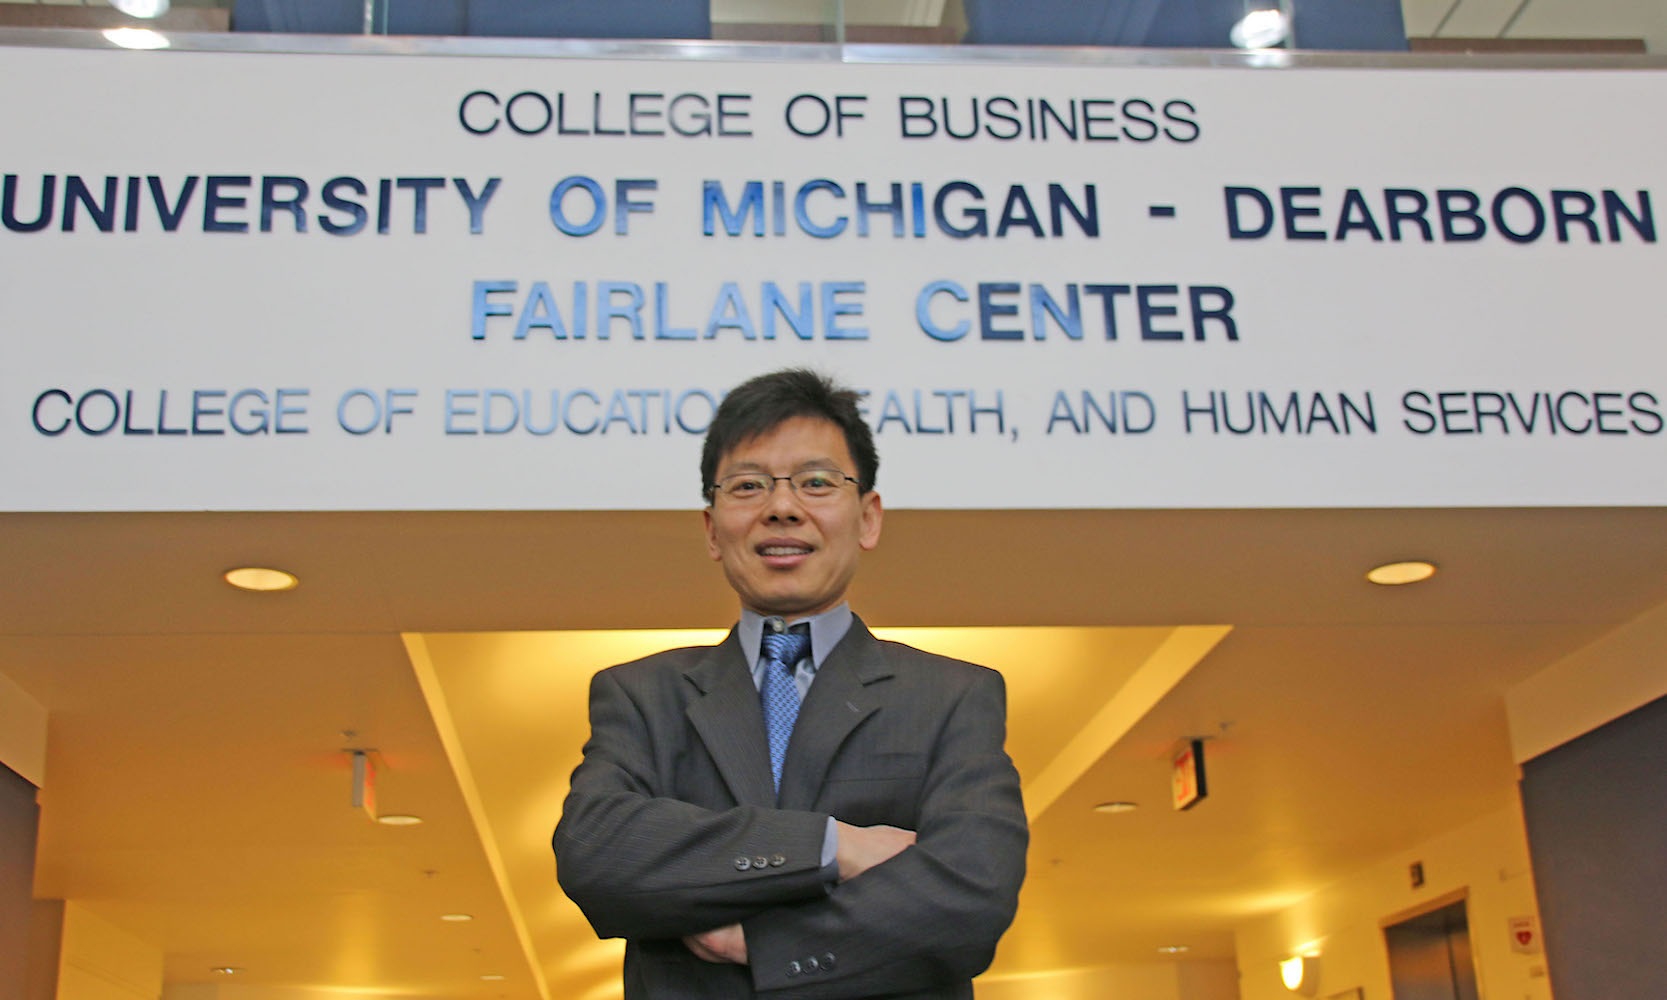 Jun He standing in front of wall that reads: College of Business, University of Michigan-Dearborn, Fairlane Center, College of Education, Health, and Human Services